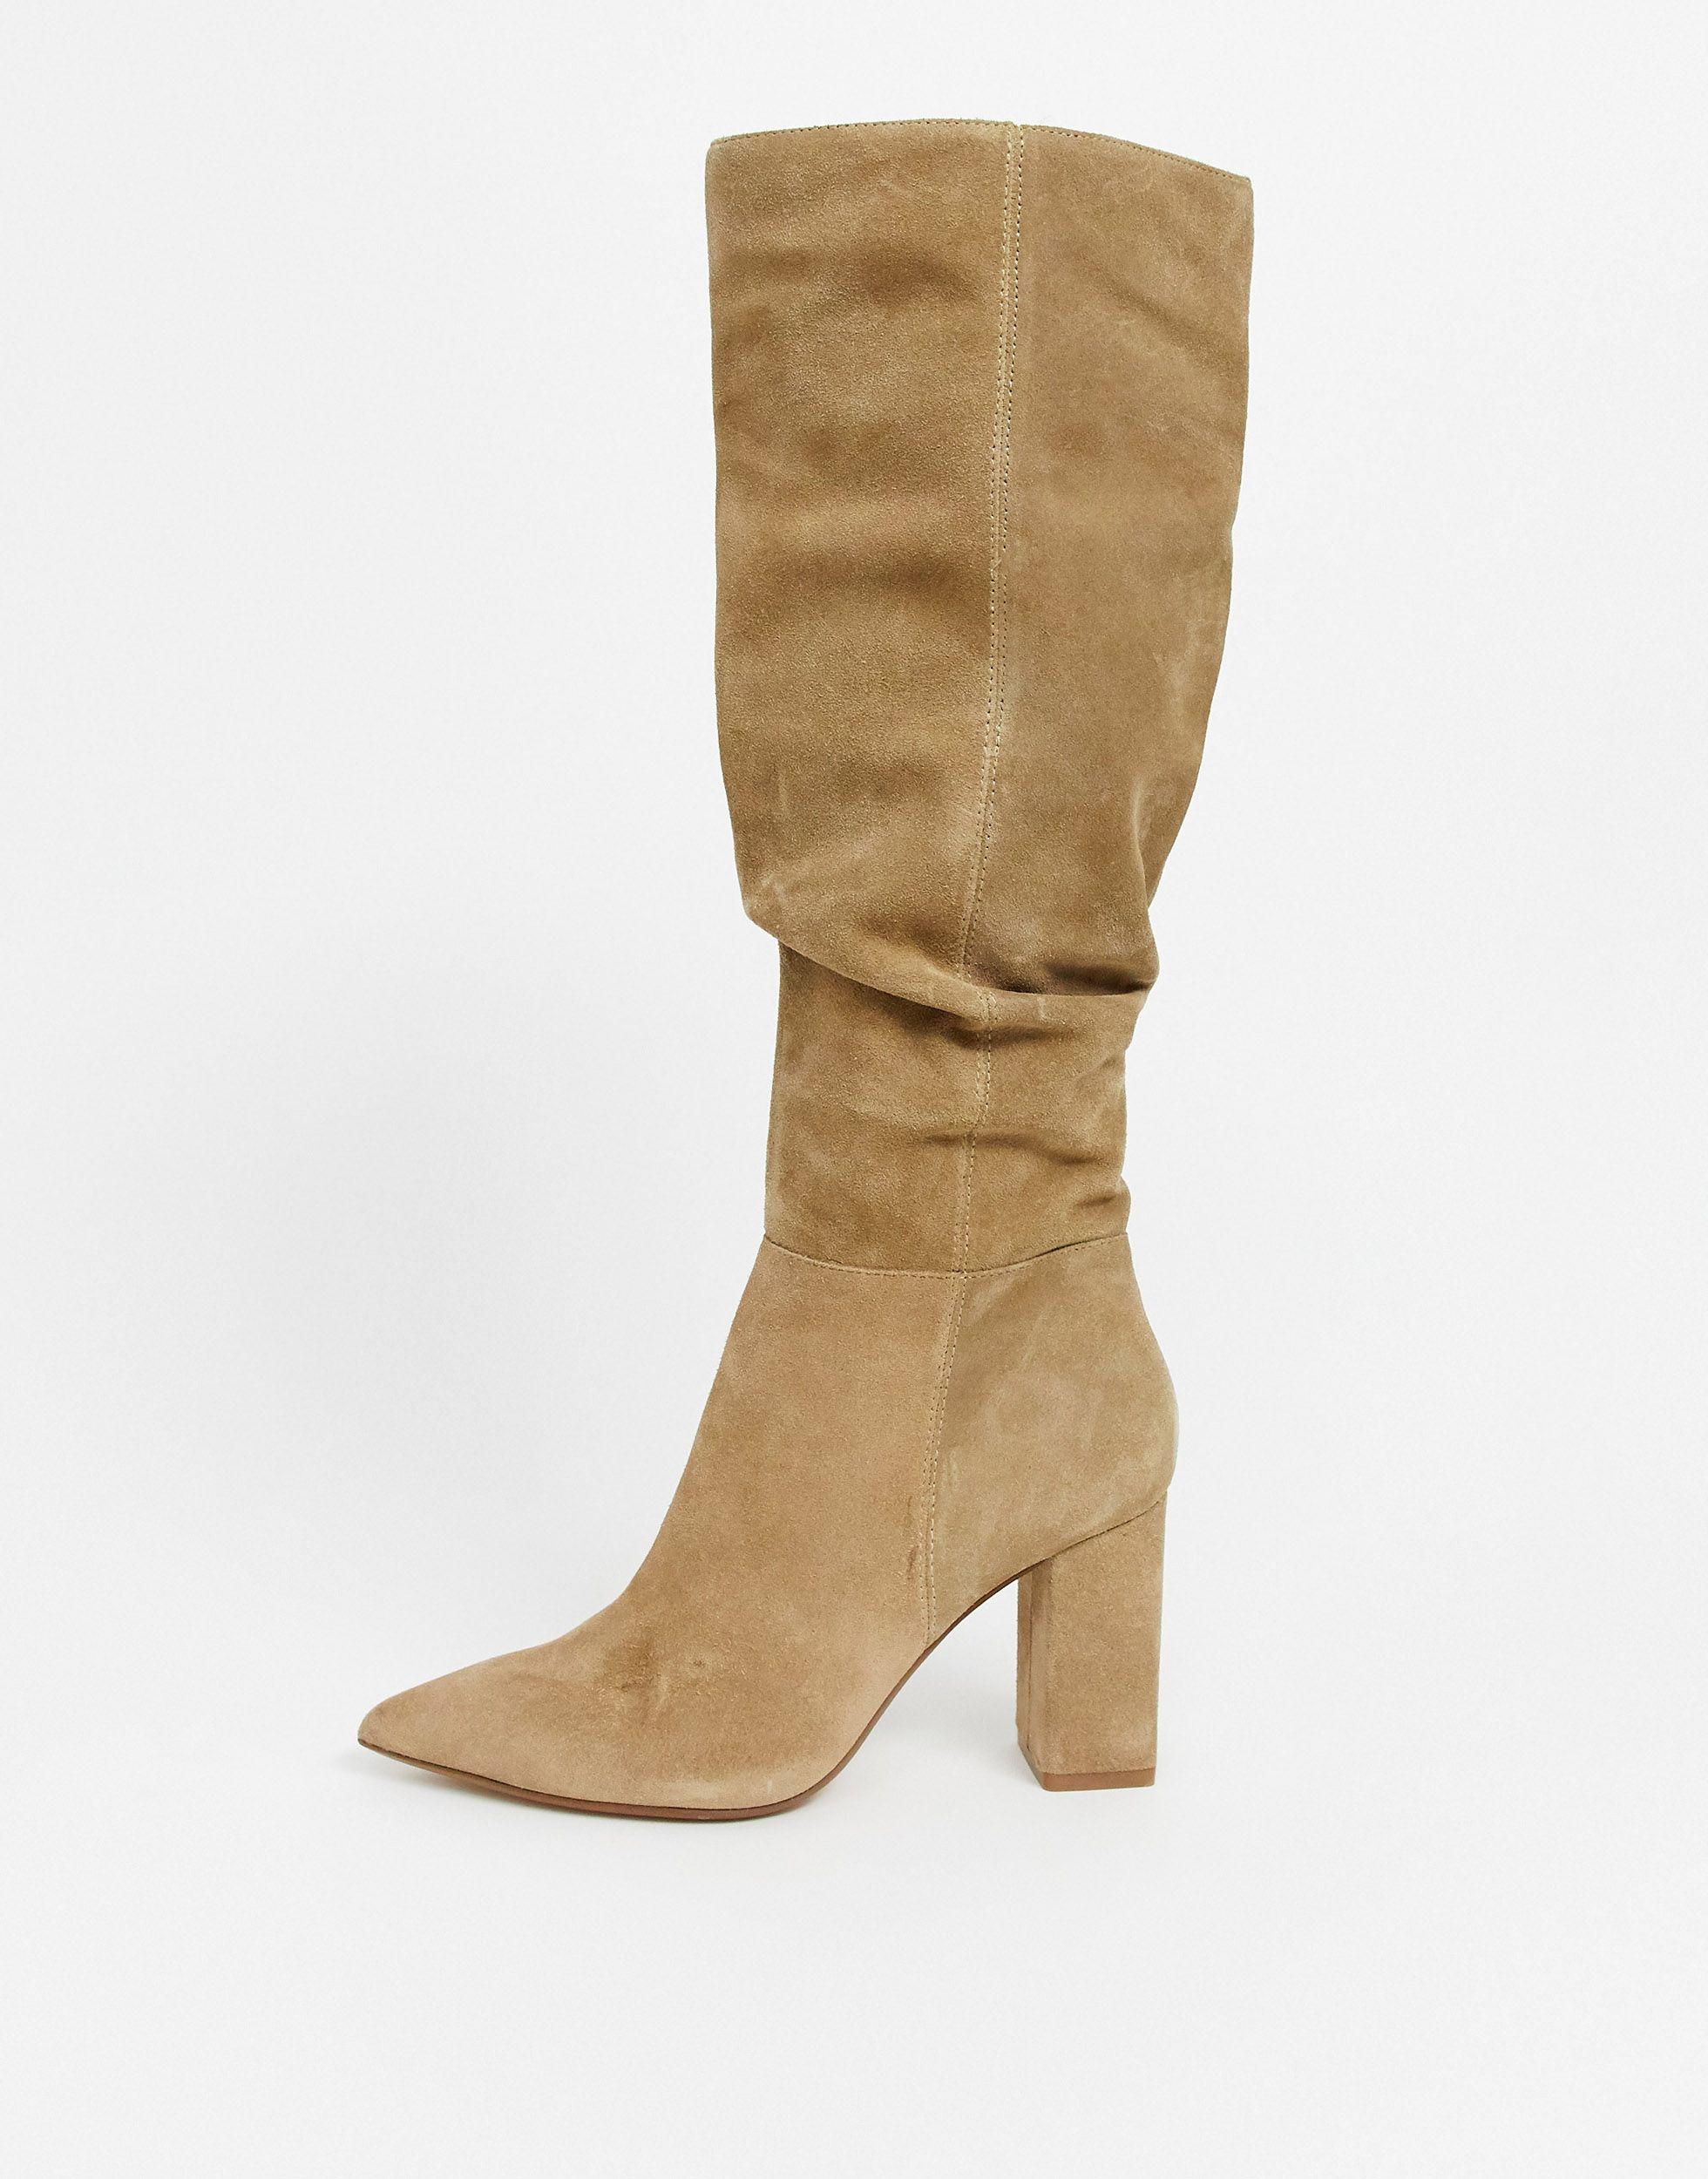 Bershka Faux Suede Slouch Knee High Boots in Natural | Lyst